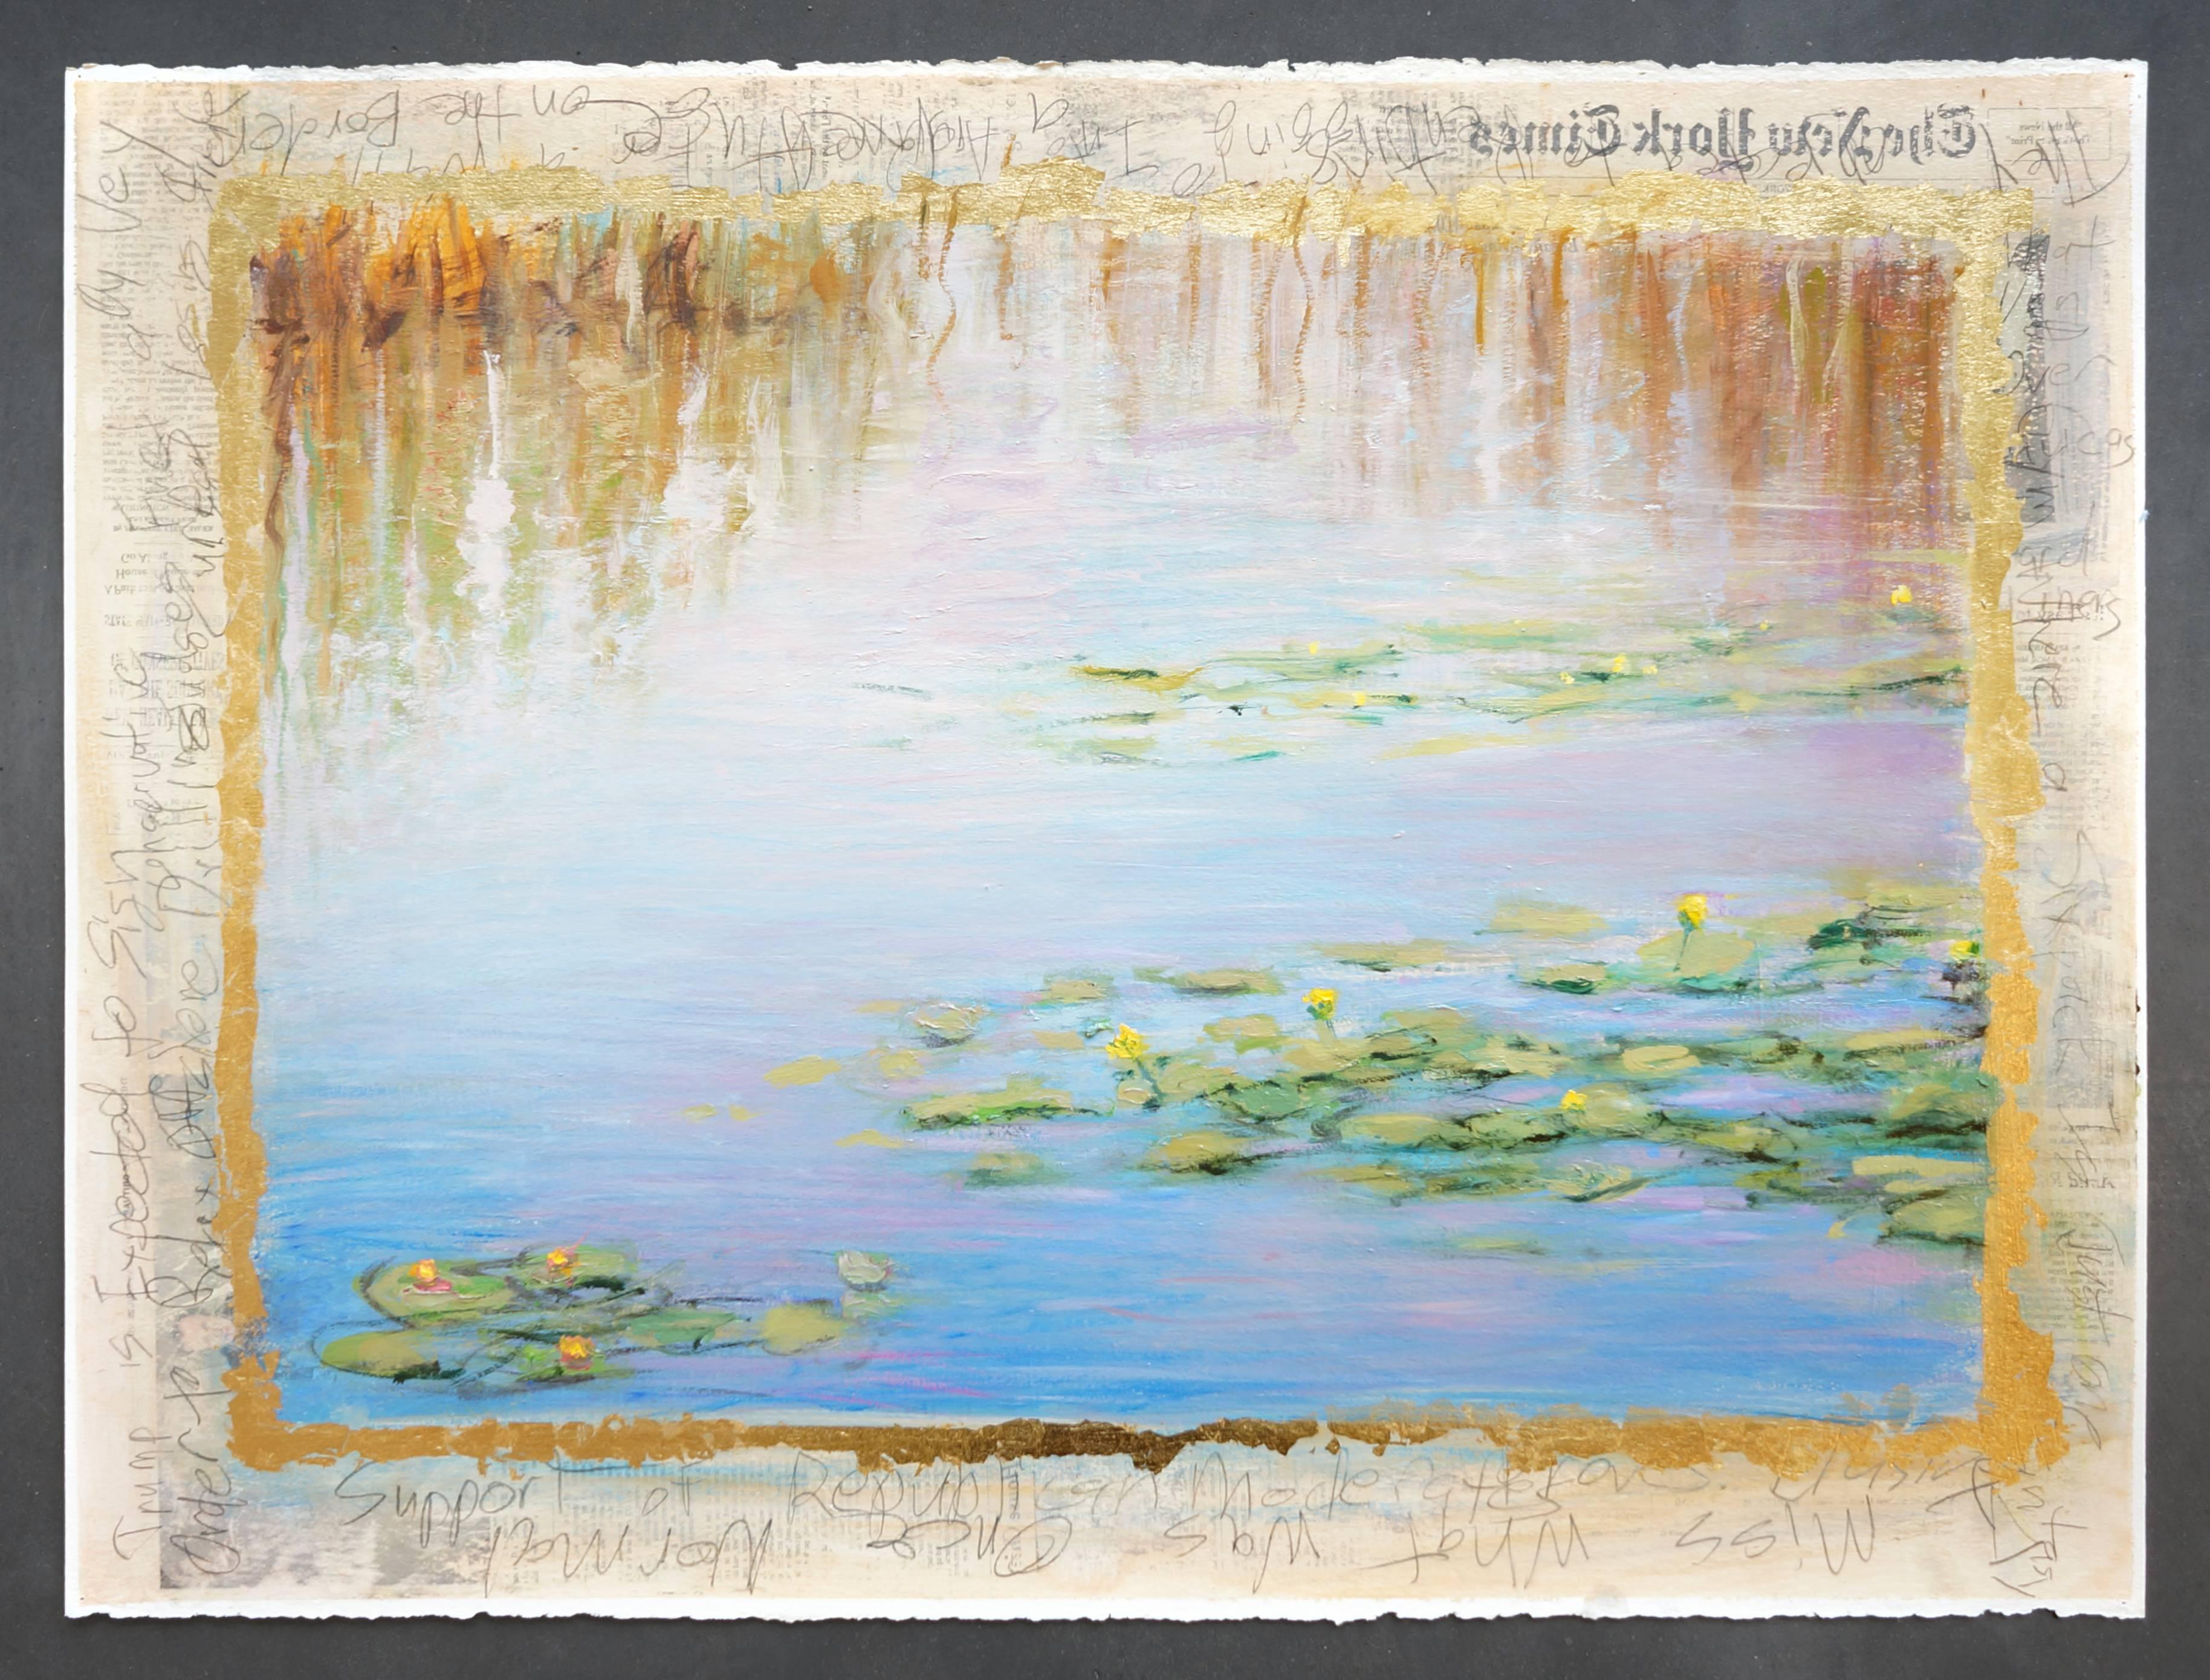 Adam Straus Landscape Painting - OLD NEWS: WATER LILIES AT ST. MARKS WILDLIFE REFUGE